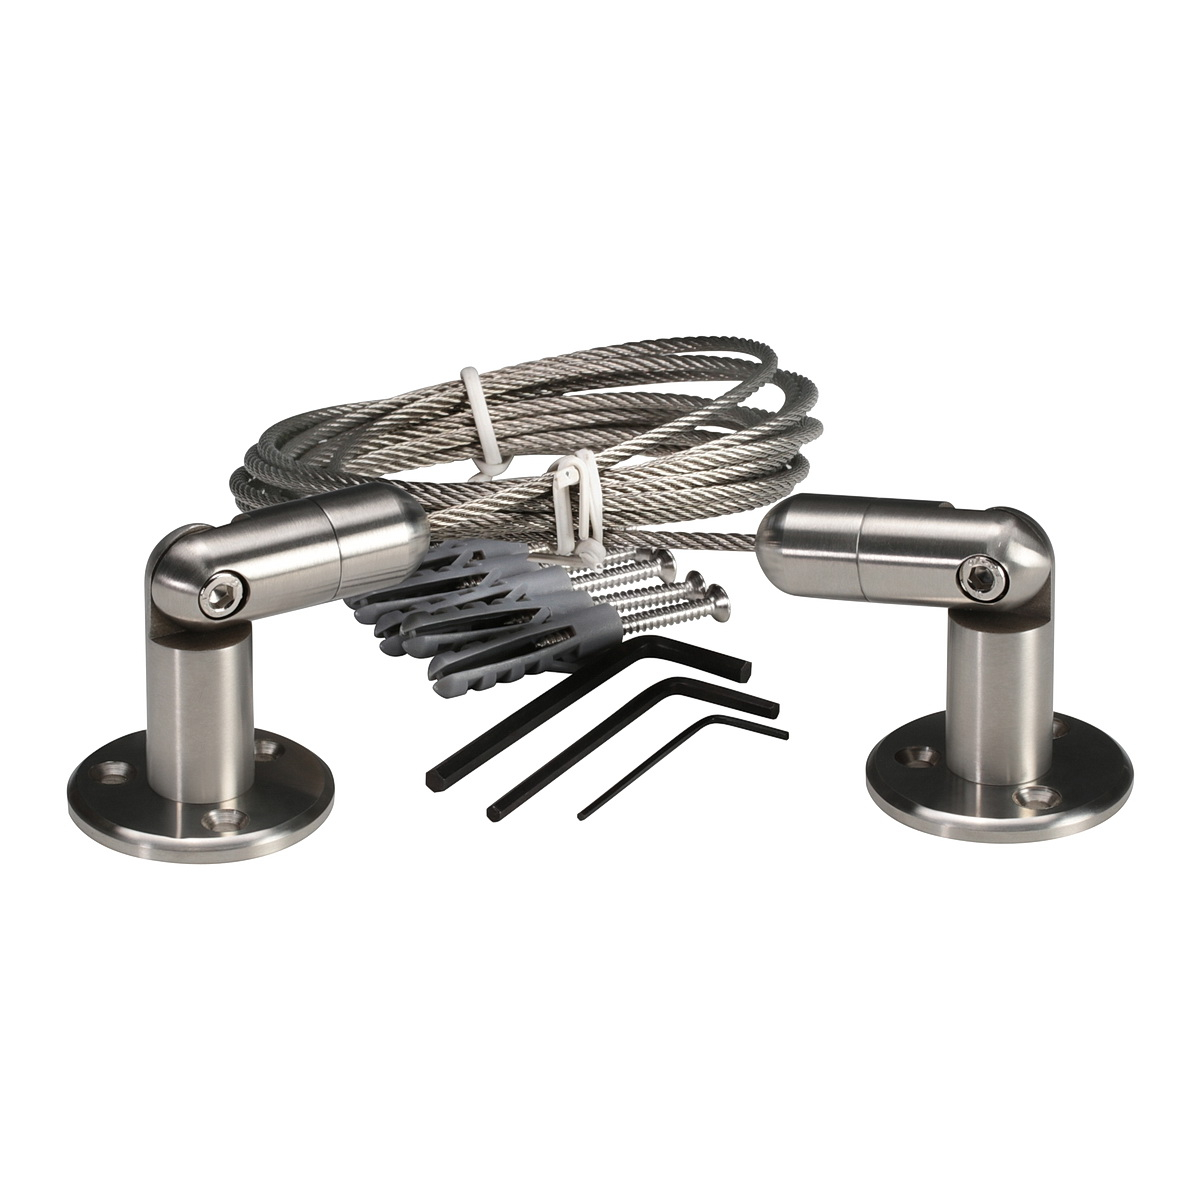 Stainless Steel Cable System Kit  Multi Angle, Cable Diameter: 1/8'' (3 mm) Length 13' 1'' (4.00m)